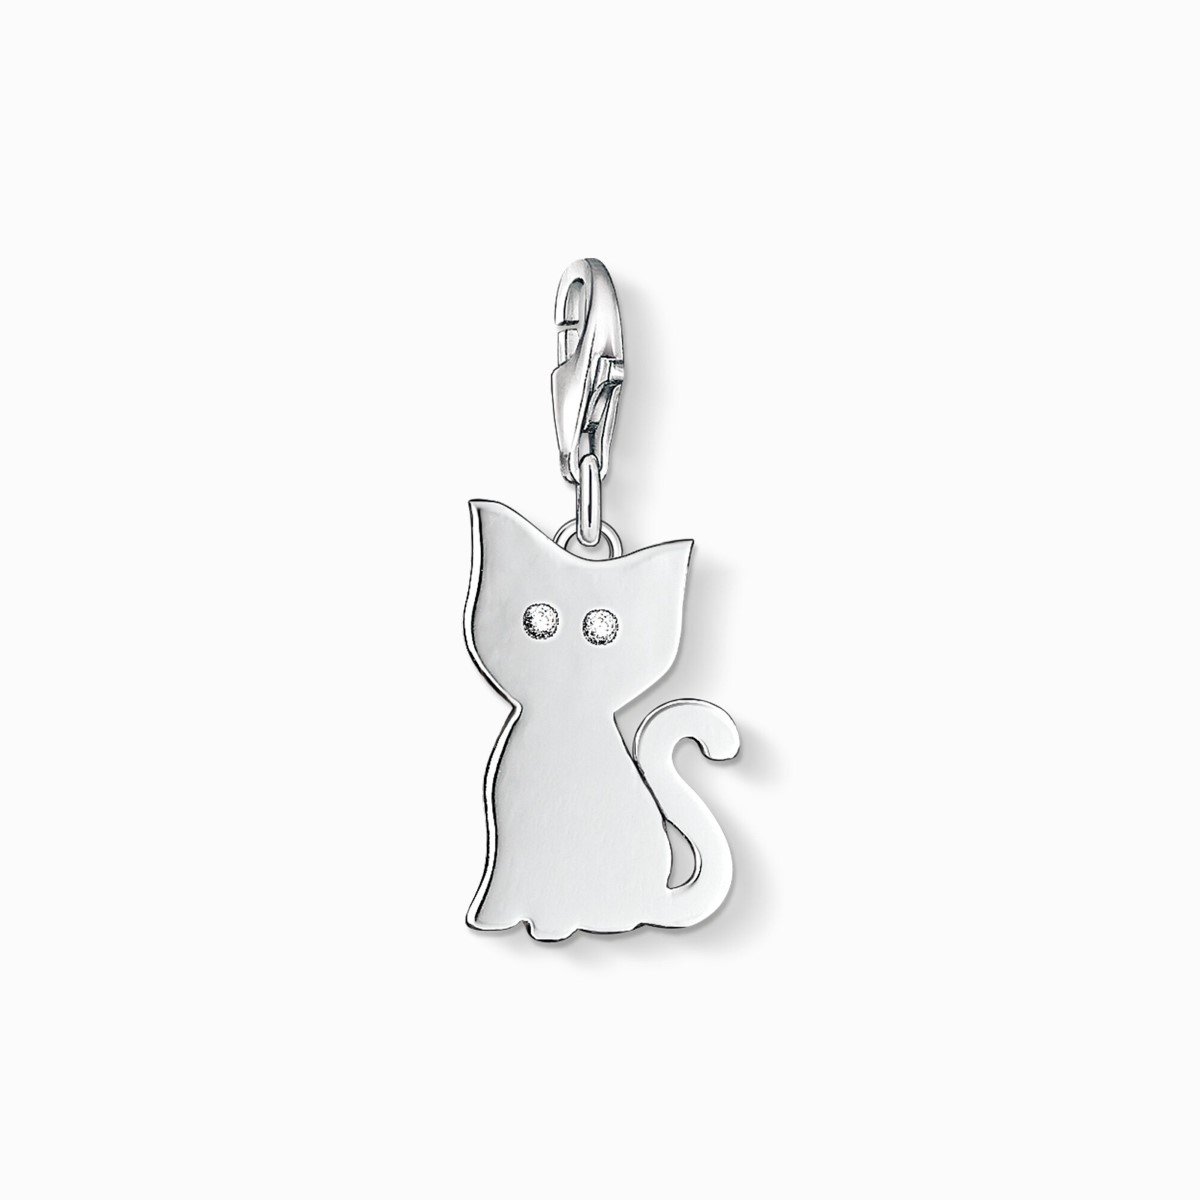 Photos - Other Jewellery Thomas Sabo Charm Pendant - Silver Cat with Zirconia Eyes 